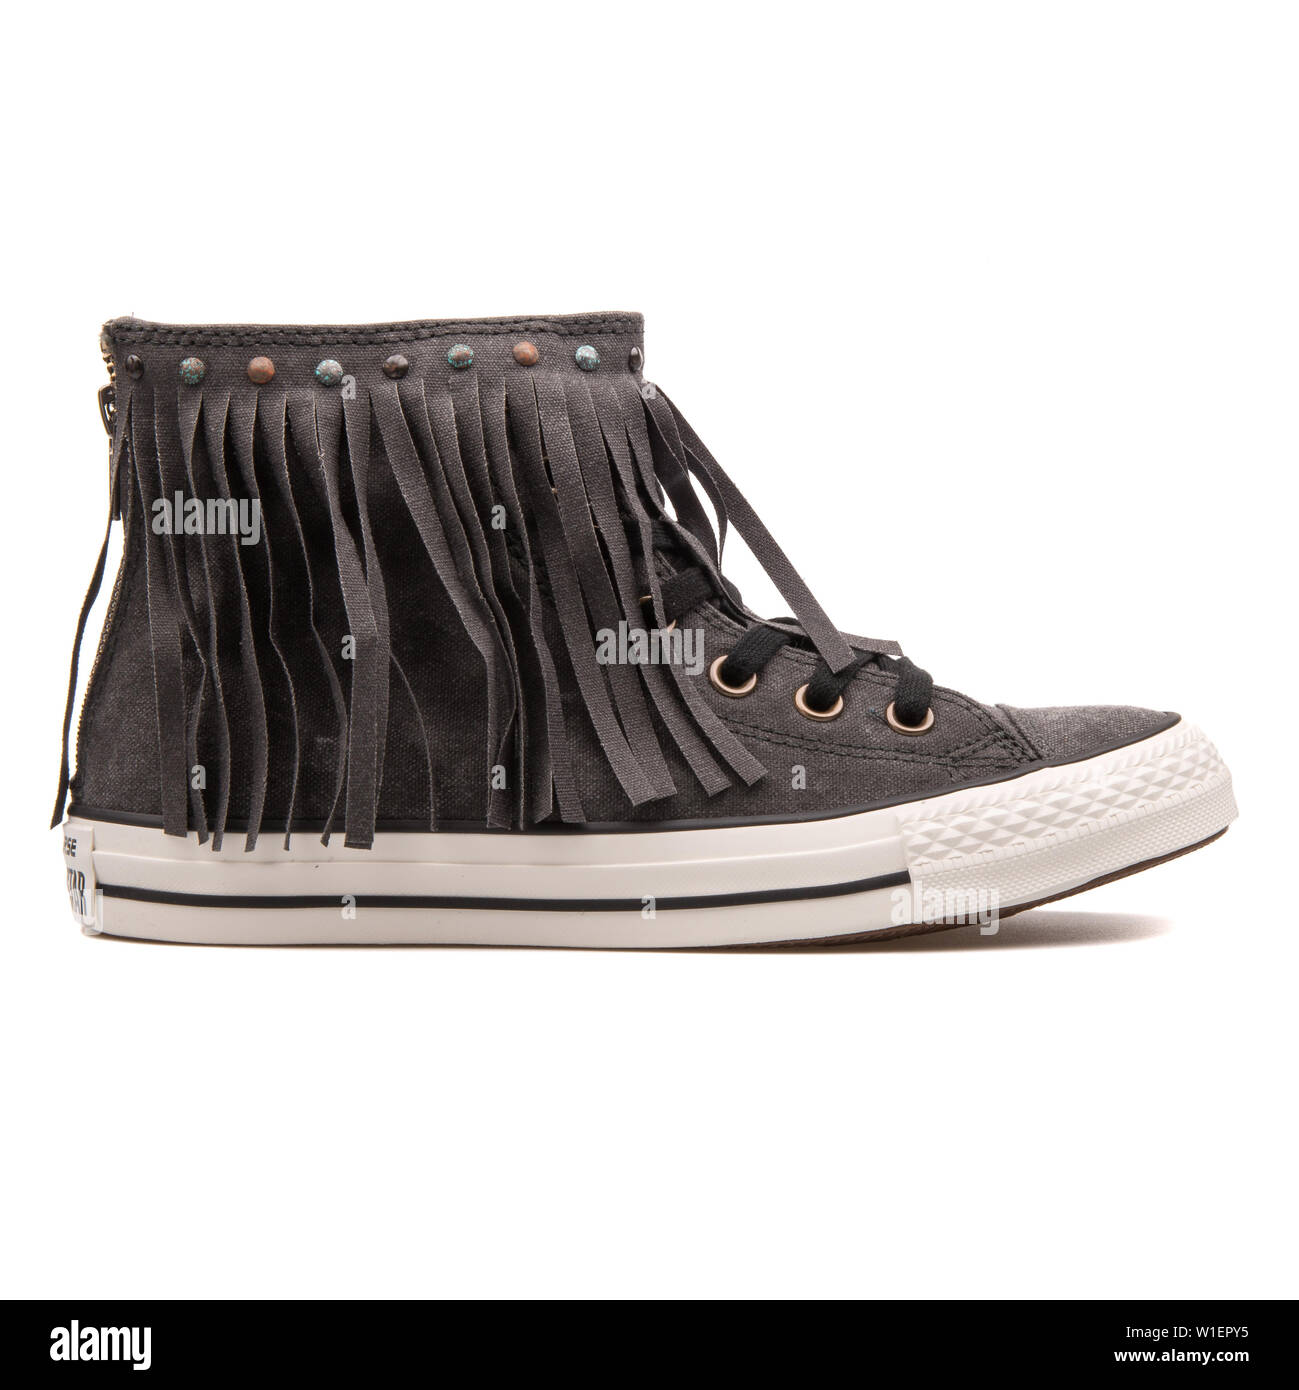 VIENNA, AUSTRIA - AUGUST 10, 2017: Converse Chuck Taylor All Star Fringe  High black sneaker on white background Stock Photo - Alamy